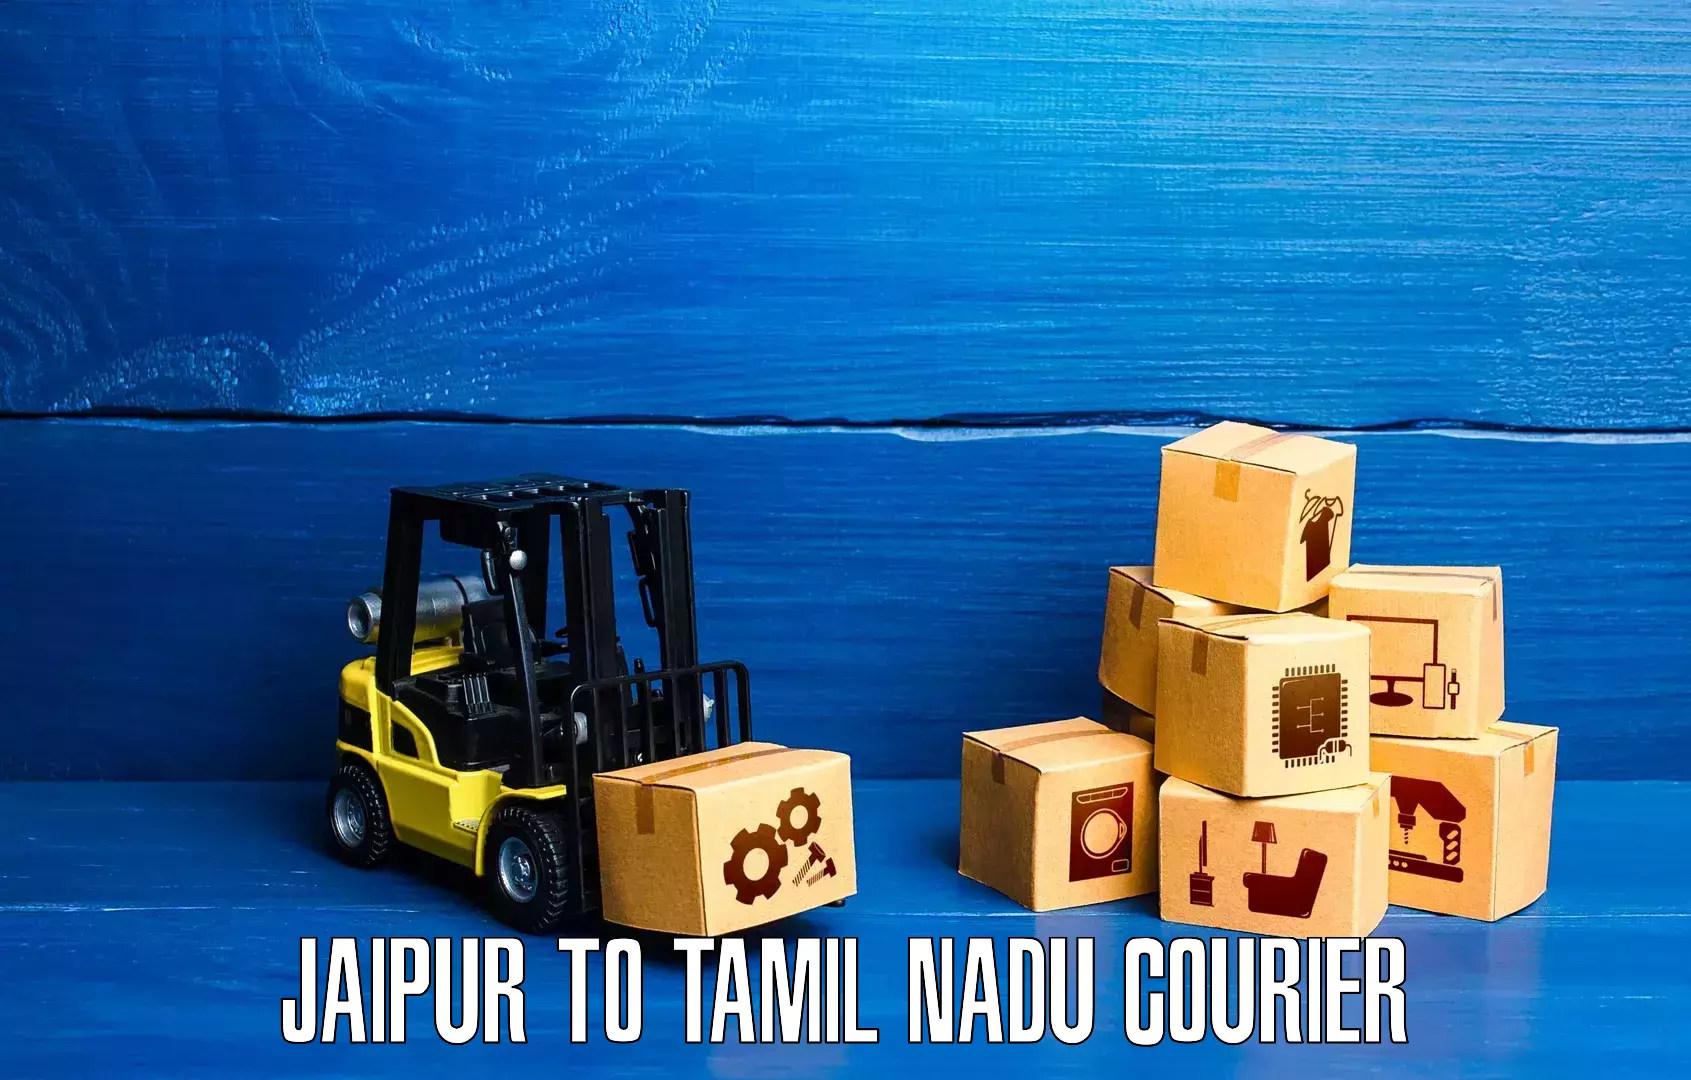 Sustainable shipping practices Jaipur to Tamil Nadu